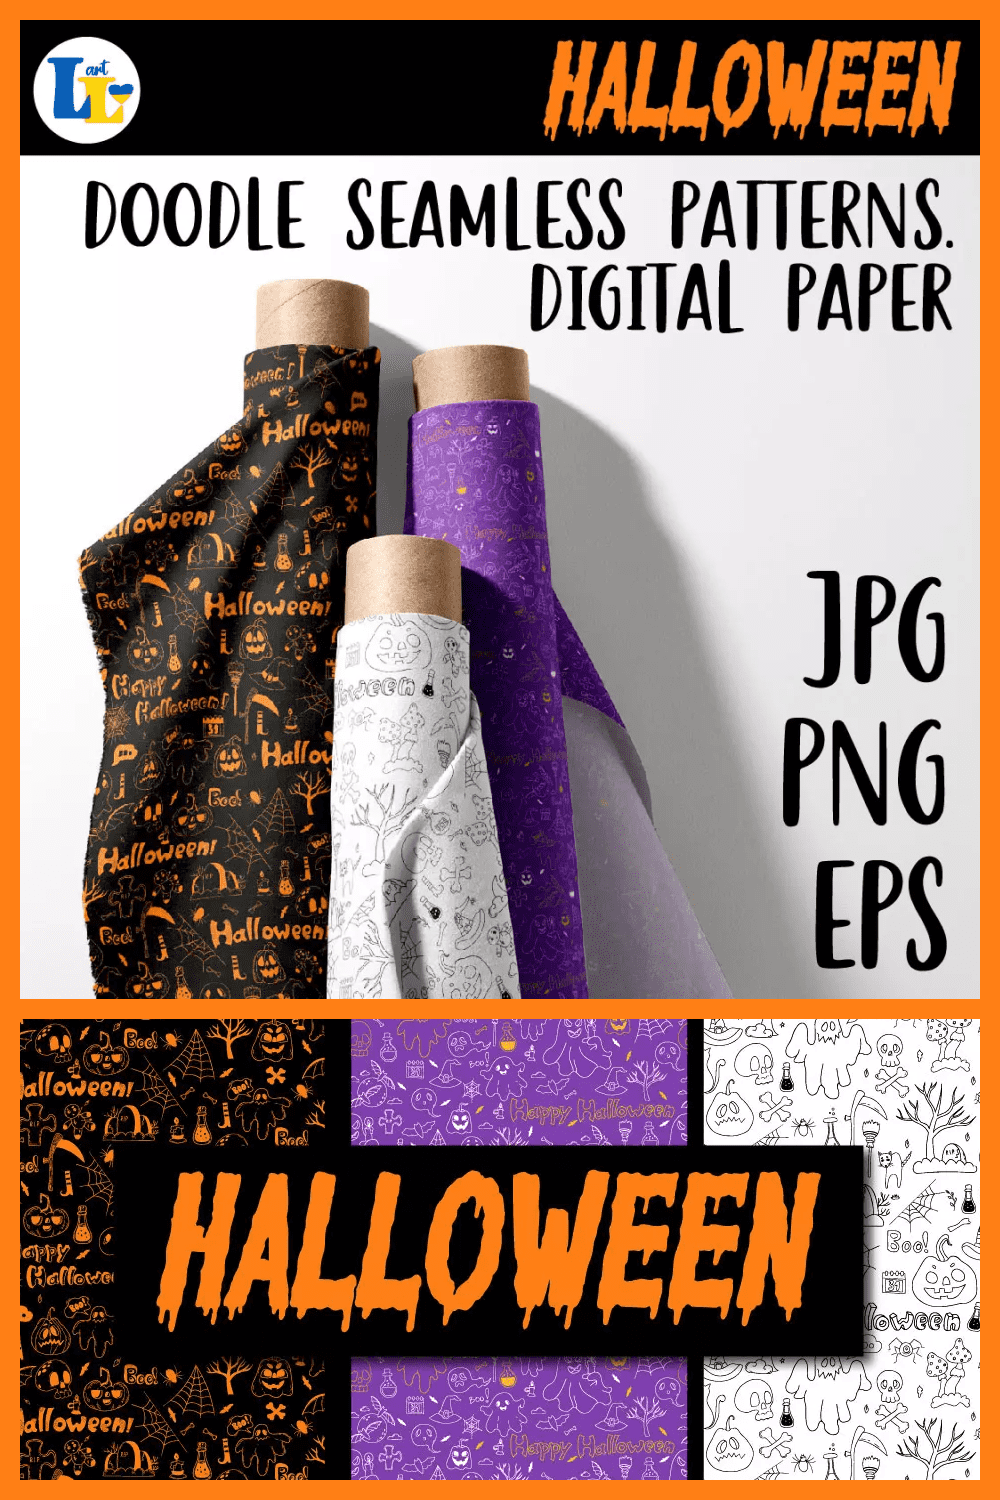 A collage of white, black and purple wrapping paper options on the theme of Halloween.